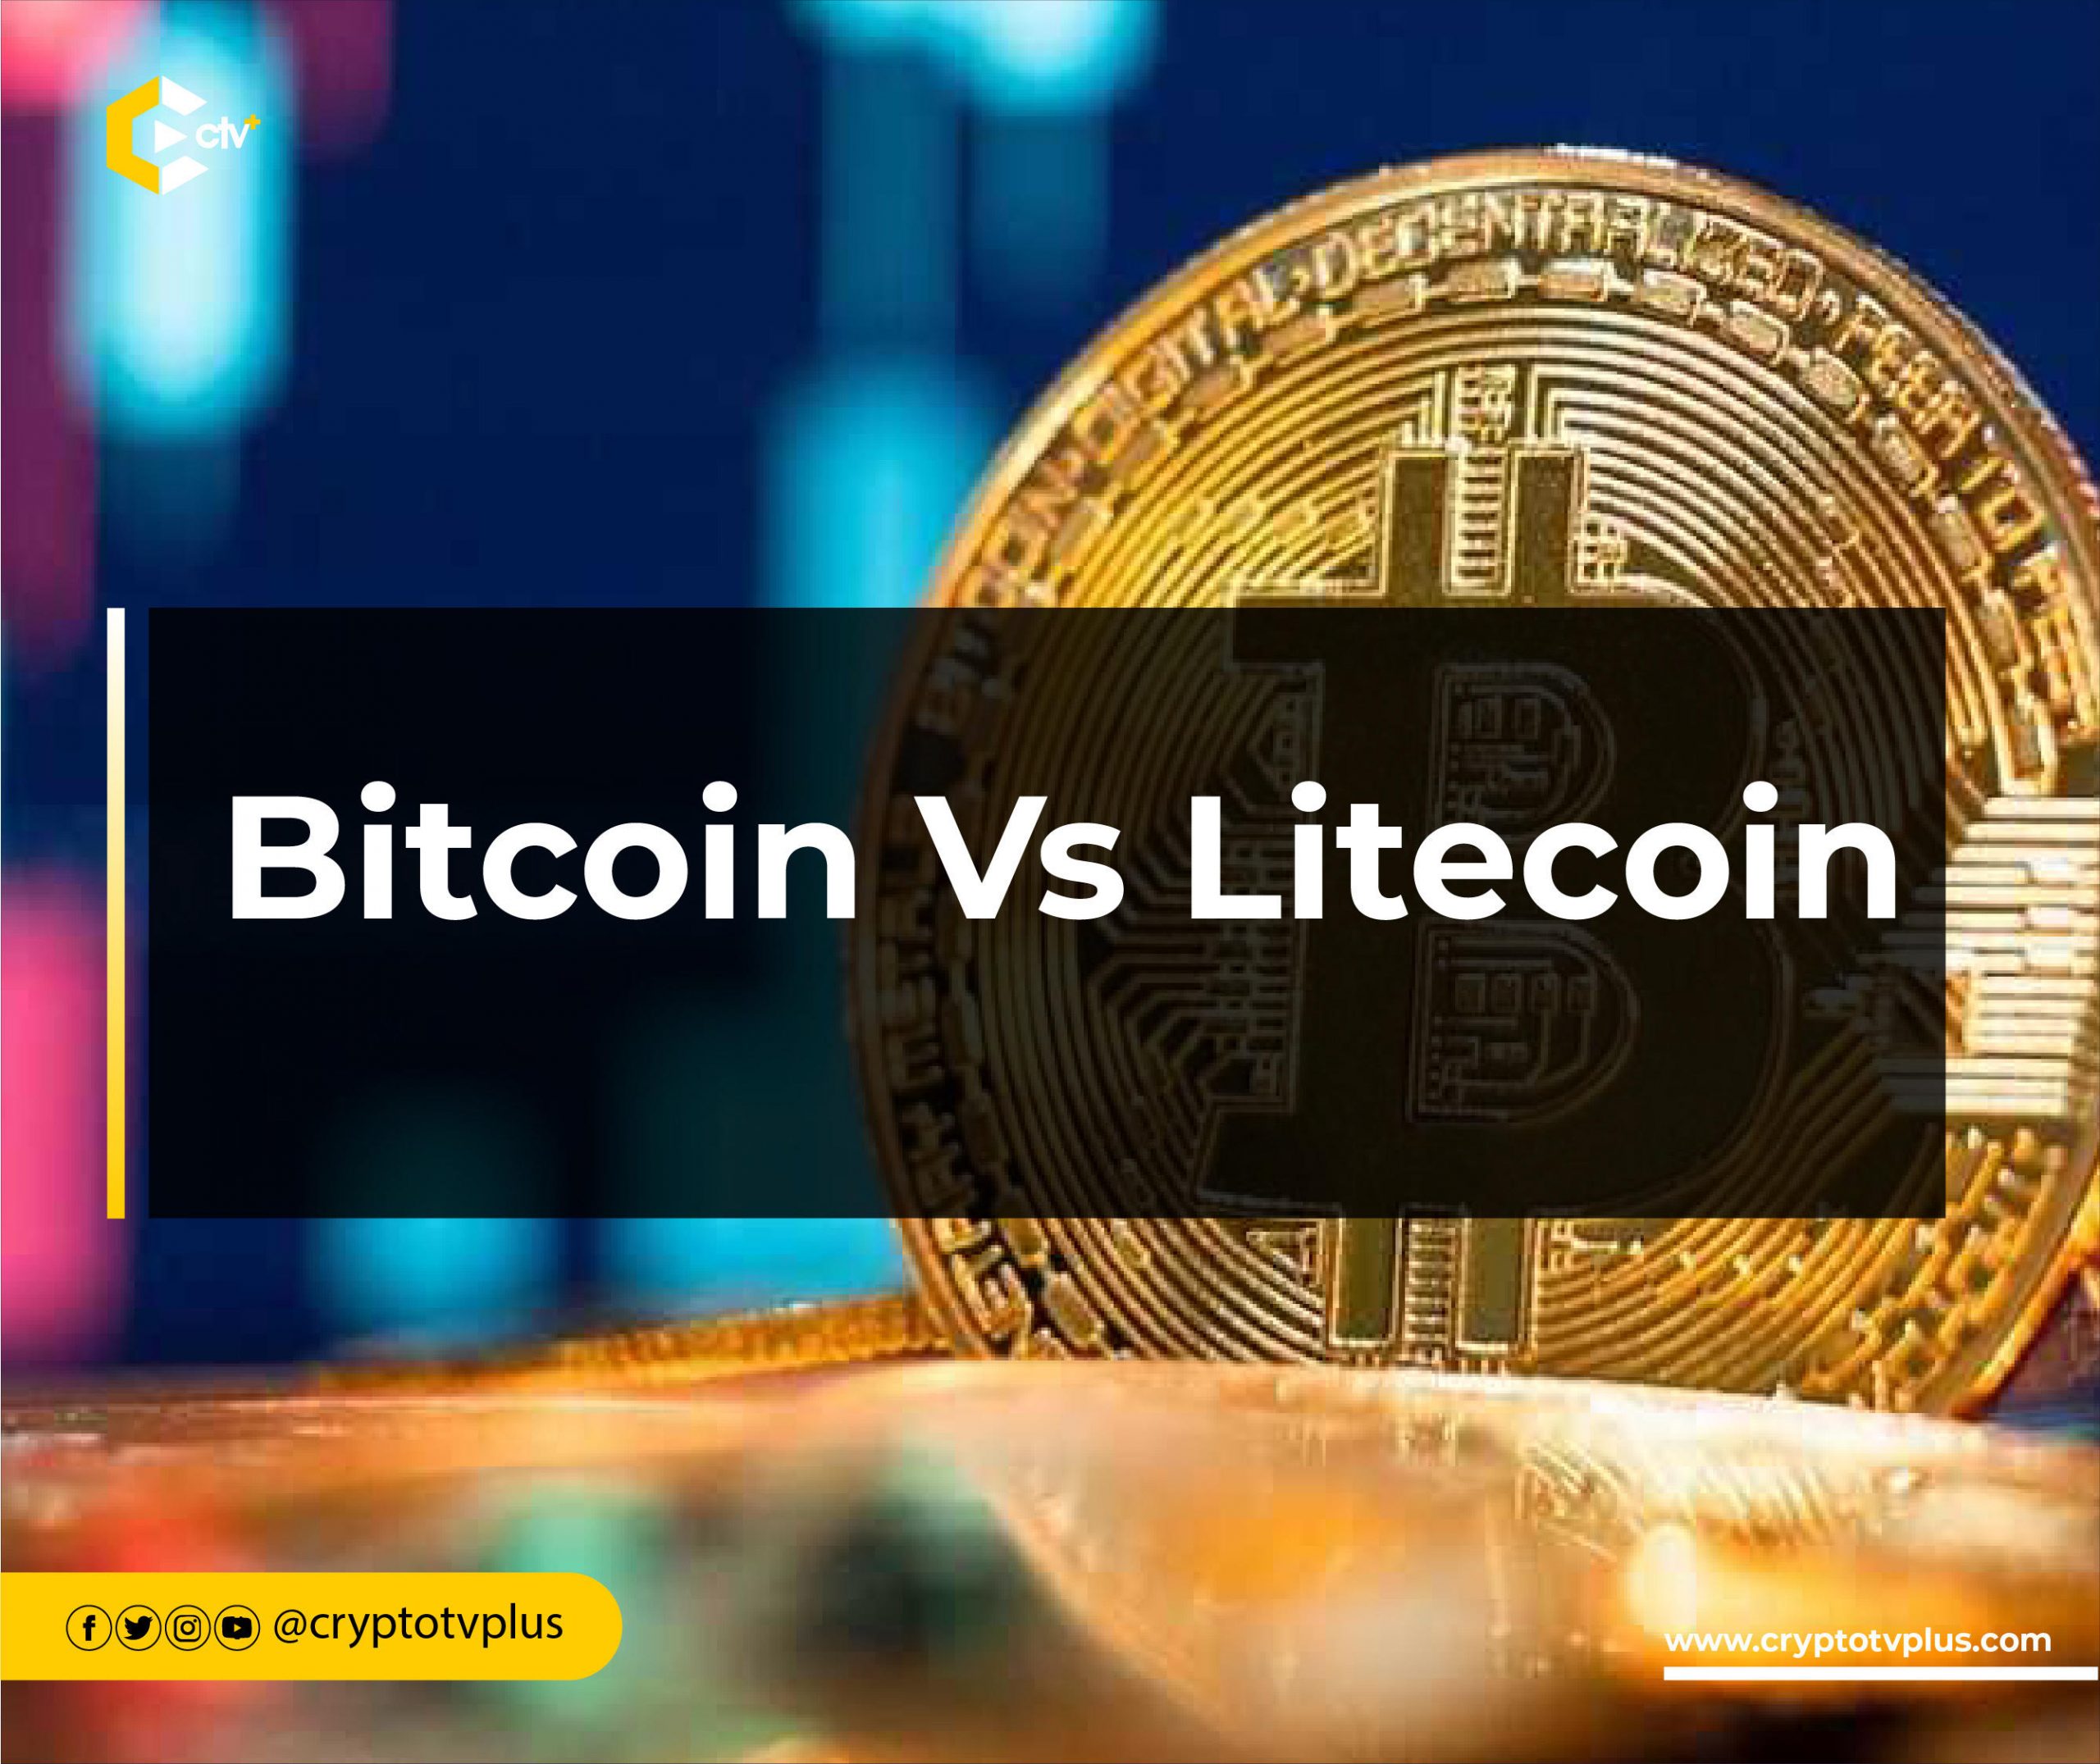 What Is Litecoin? How Is It Different From Bitcoin?